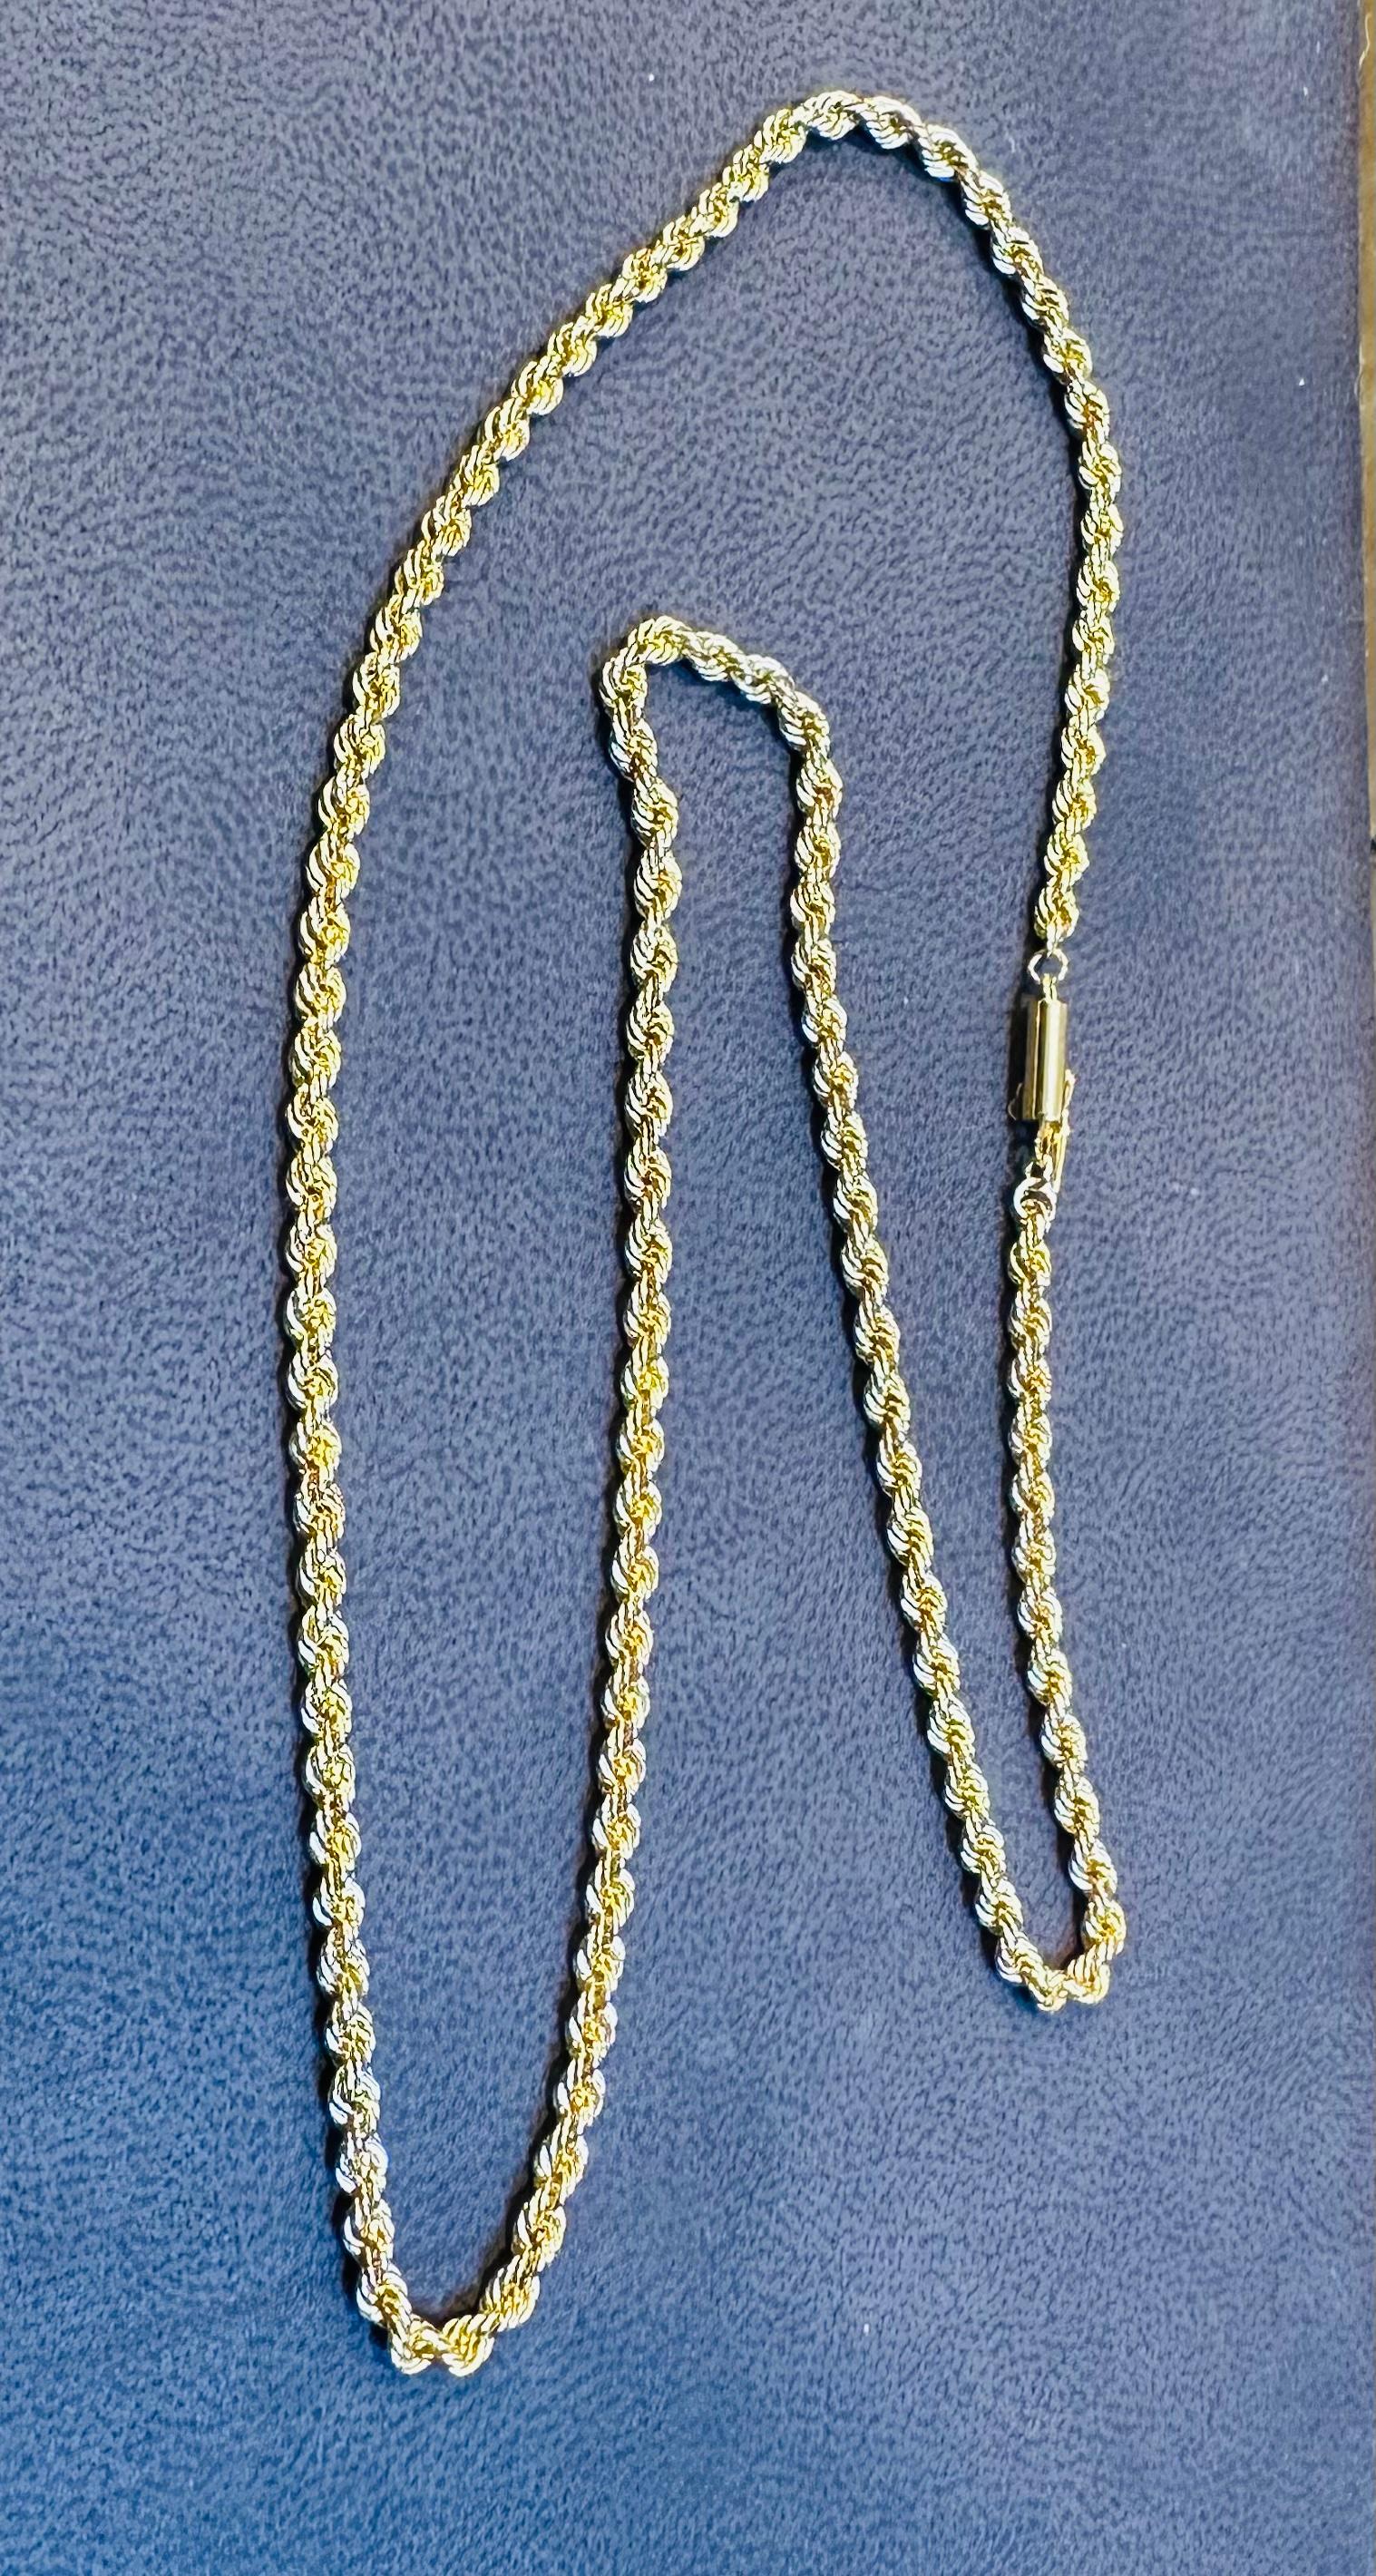 Vintage 14 Karat Yellow Gold 17 Gm, Rope Chain Necklace 8